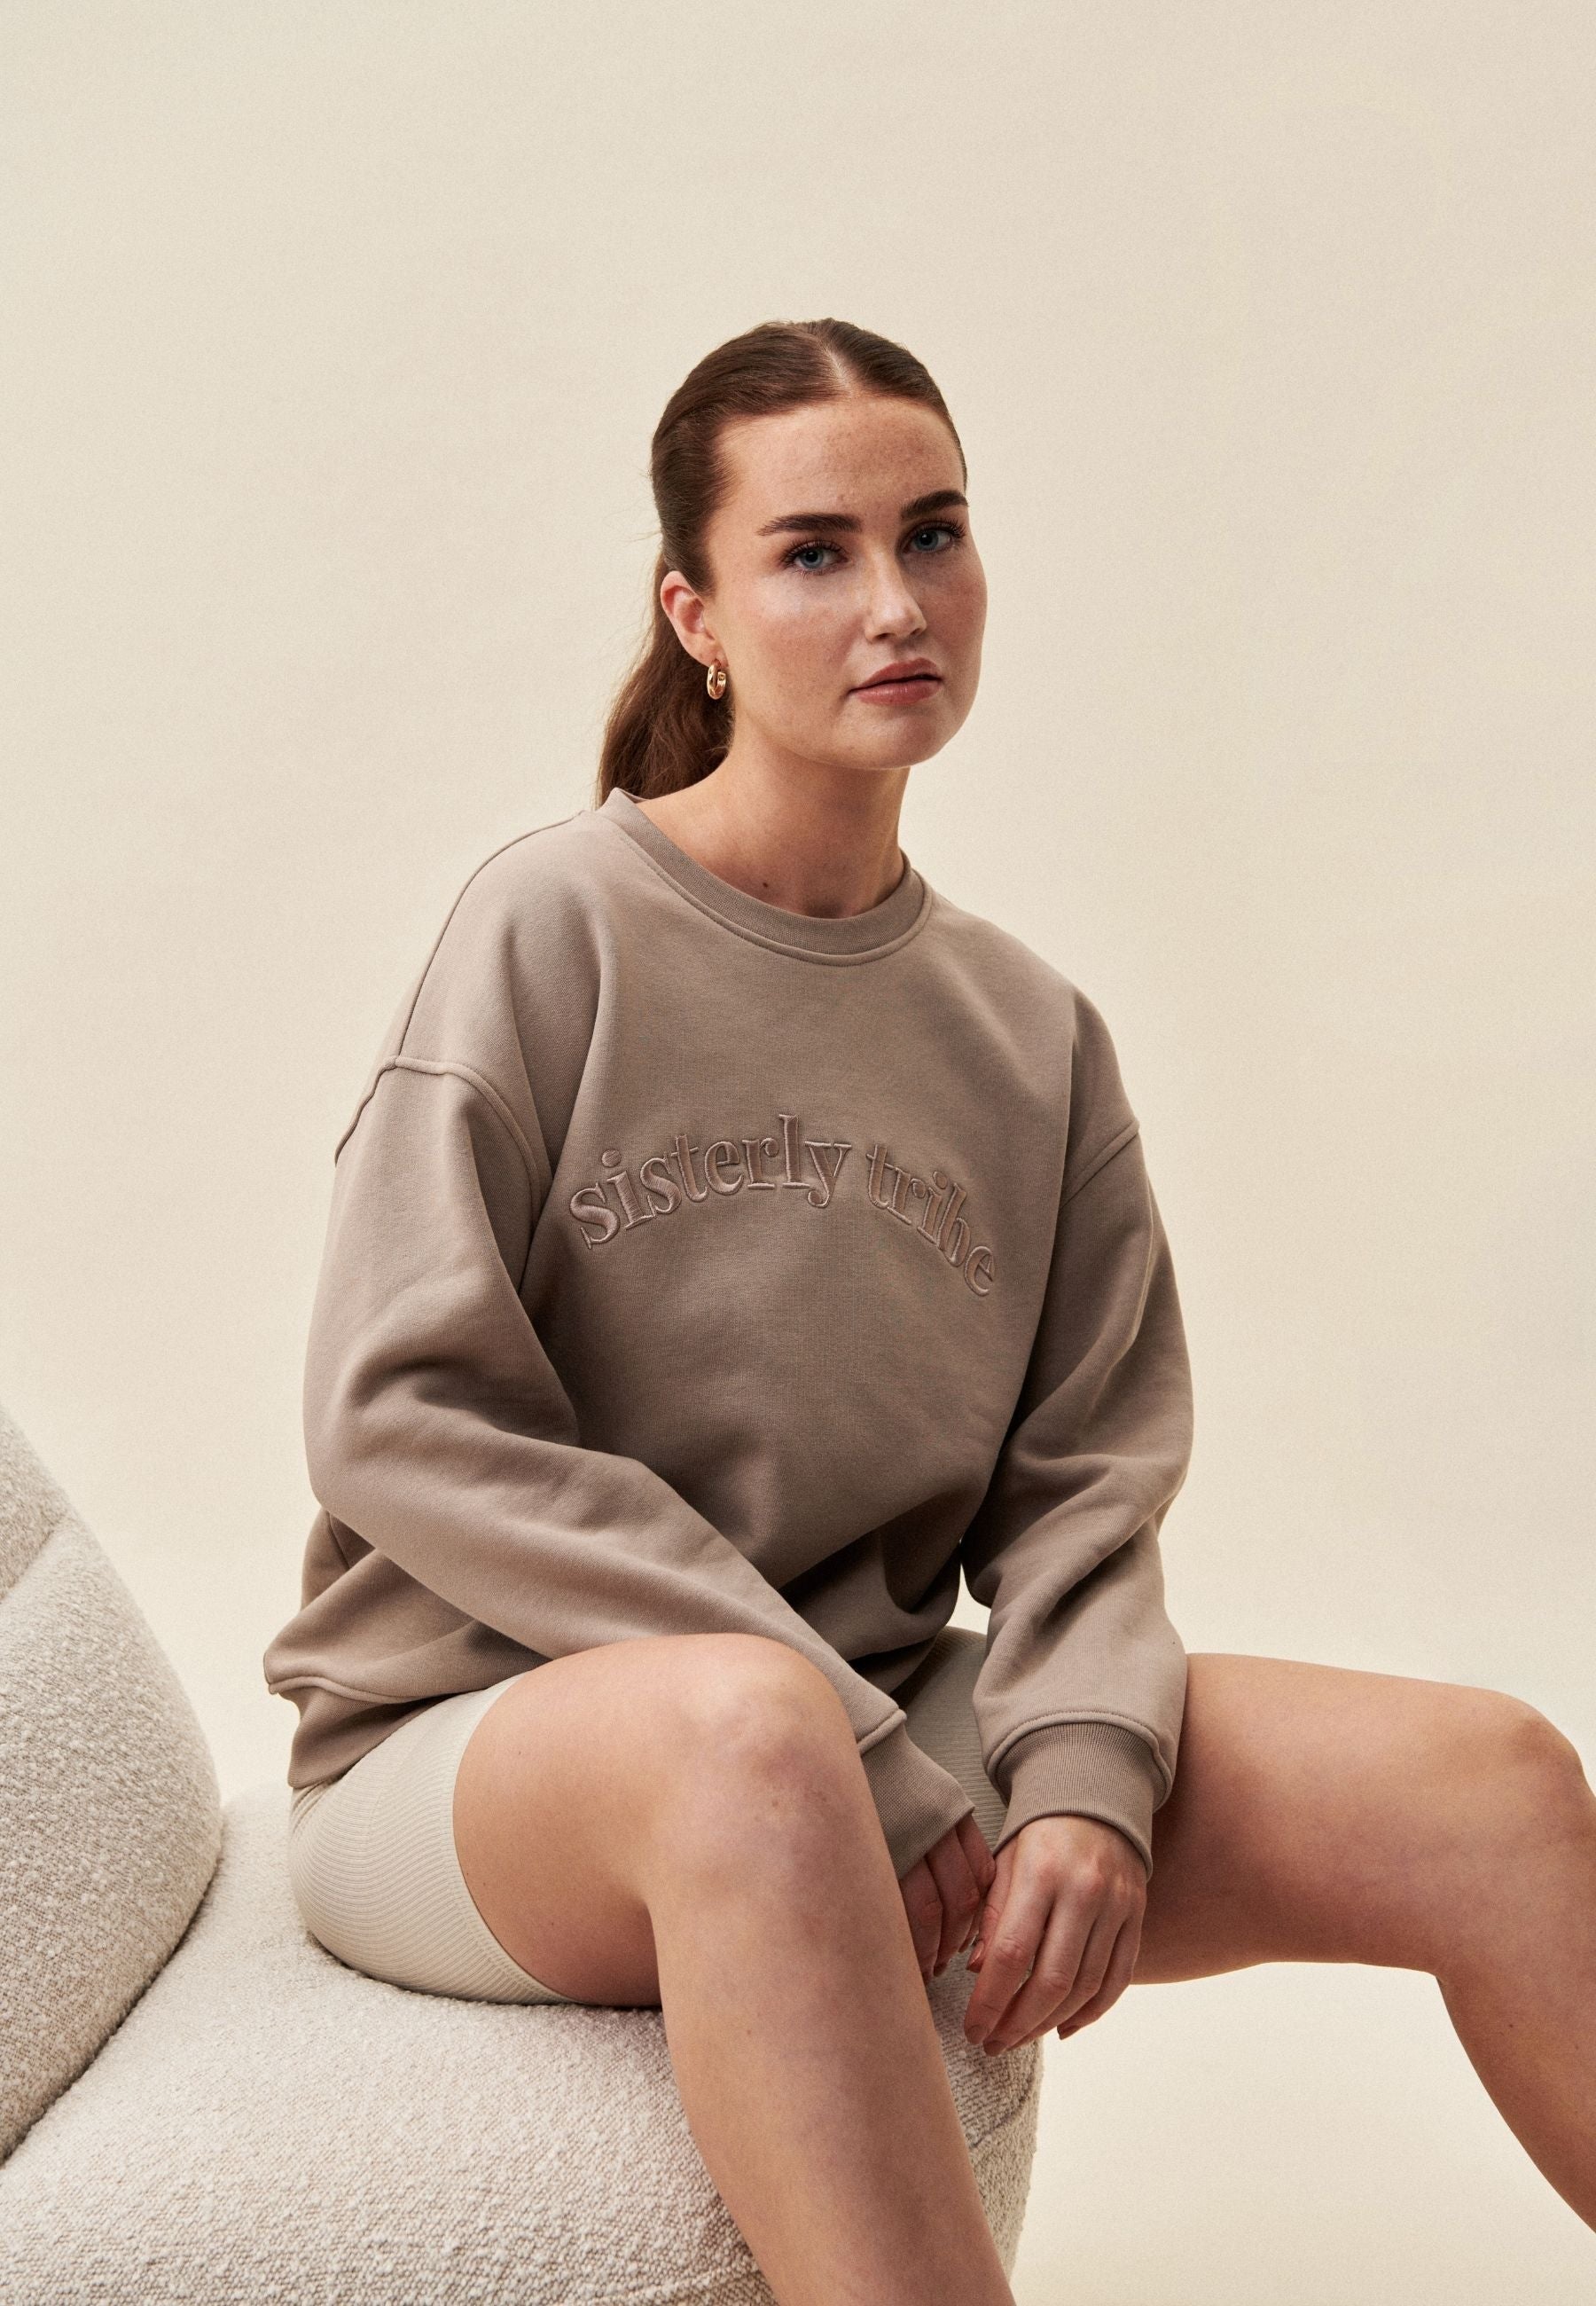 Sisterly Tribe Sweatshirt Front Cappuccino